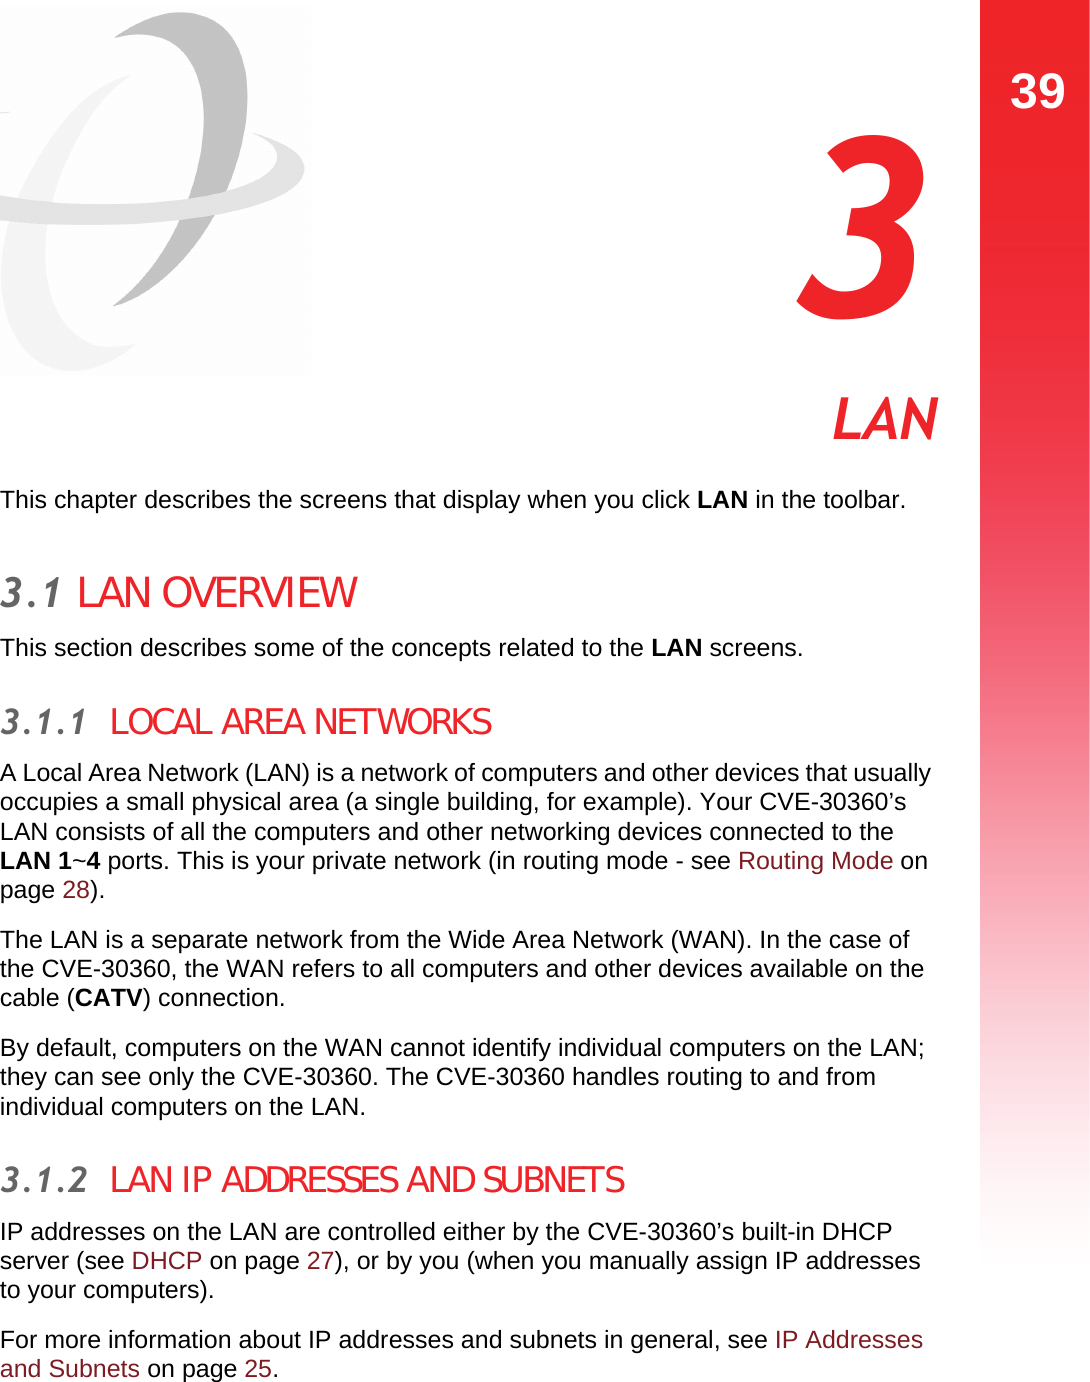 39LAN  3 LANThis chapter describes the screens that display when you click LAN in the toolbar.3.1 LAN OVERVIEWThis section describes some of the concepts related to the LAN screens.3.1.1  LOCAL AREA NETWORKSA Local Area Network (LAN) is a network of computers and other devices that usually occupies a small physical area (a single building, for example). Your CVE-30360’s LAN consists of all the computers and other networking devices connected to the LAN 1~4 ports. This is your private network (in routing mode - see Routing Mode on page 28). The LAN is a separate network from the Wide Area Network (WAN). In the case of the CVE-30360, the WAN refers to all computers and other devices available on the cable (CATV) connection.By default, computers on the WAN cannot identify individual computers on the LAN; they can see only the CVE-30360. The CVE-30360 handles routing to and from individual computers on the LAN.3.1.2  LAN IP ADDRESSES AND SUBNETSIP addresses on the LAN are controlled either by the CVE-30360’s built-in DHCP server (see DHCP on page 27), or by you (when you manually assign IP addresses to your computers).For more information about IP addresses and subnets in general, see IP Addresses and Subnets on page 25.